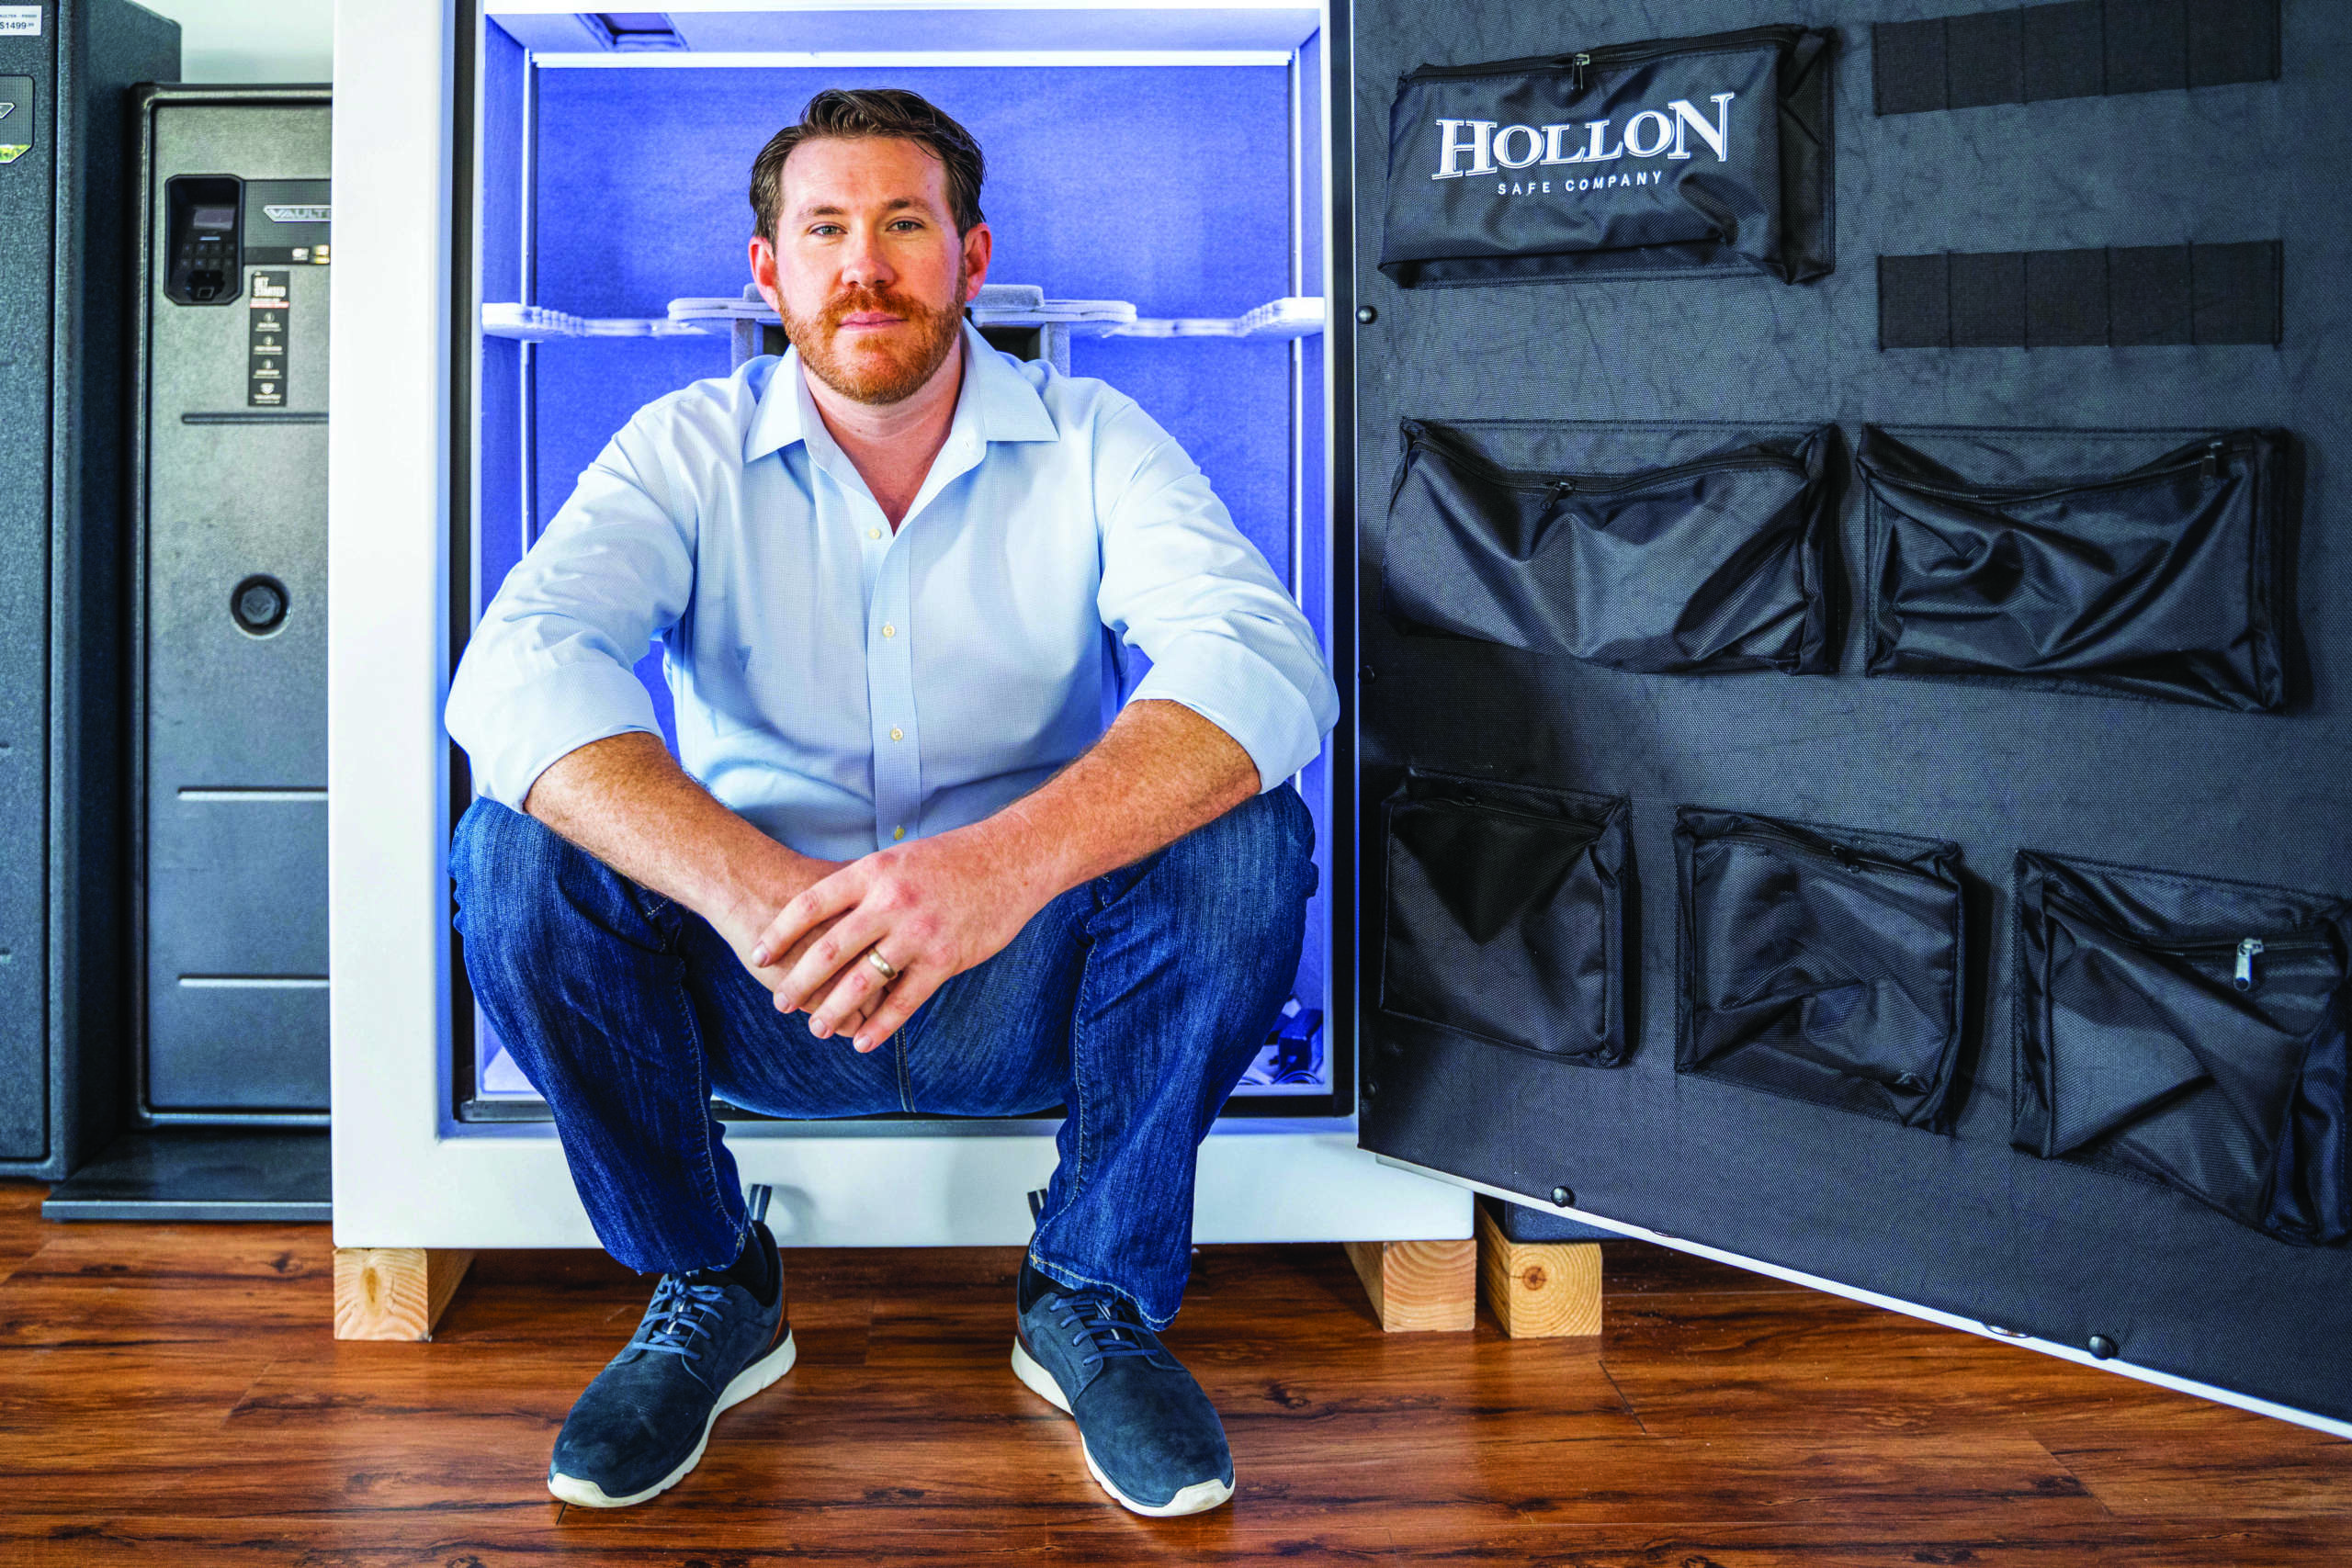 Mark Gabel’s expanding business, Safe and Sound, is booming in Naples because luxury homes need luxury safes and safe rooms.